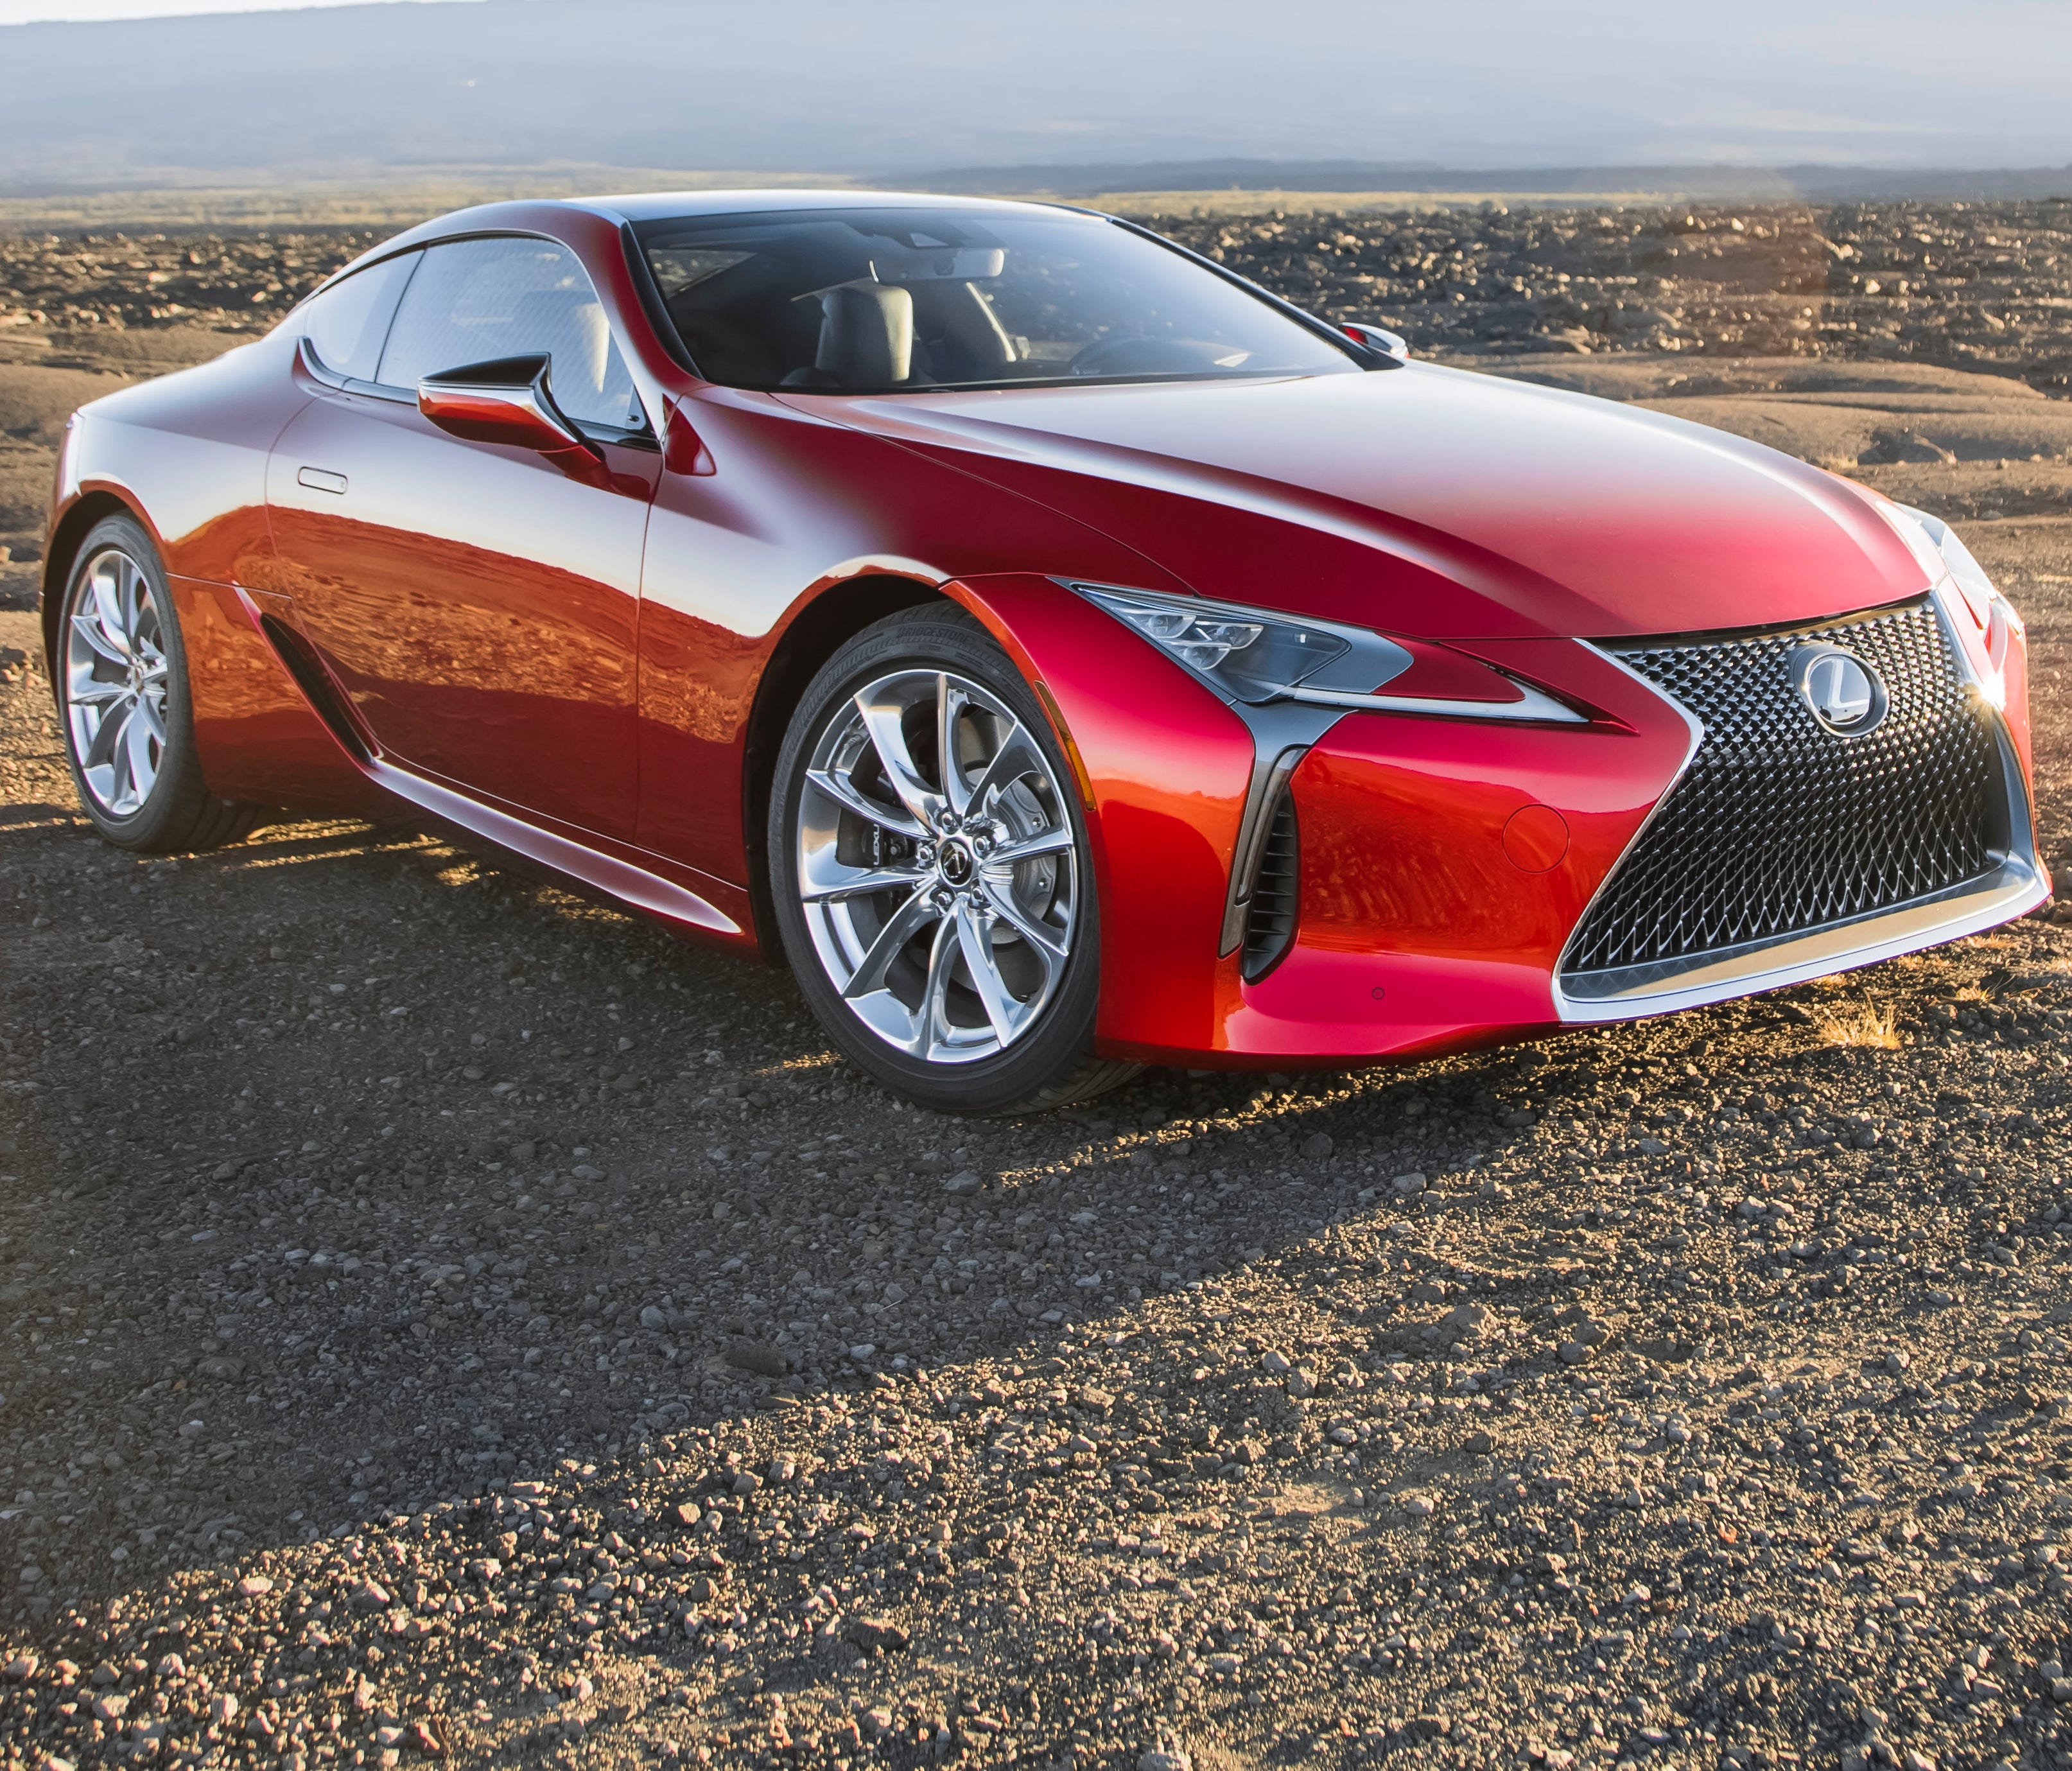 Lexus offers its stunning new LC coupe